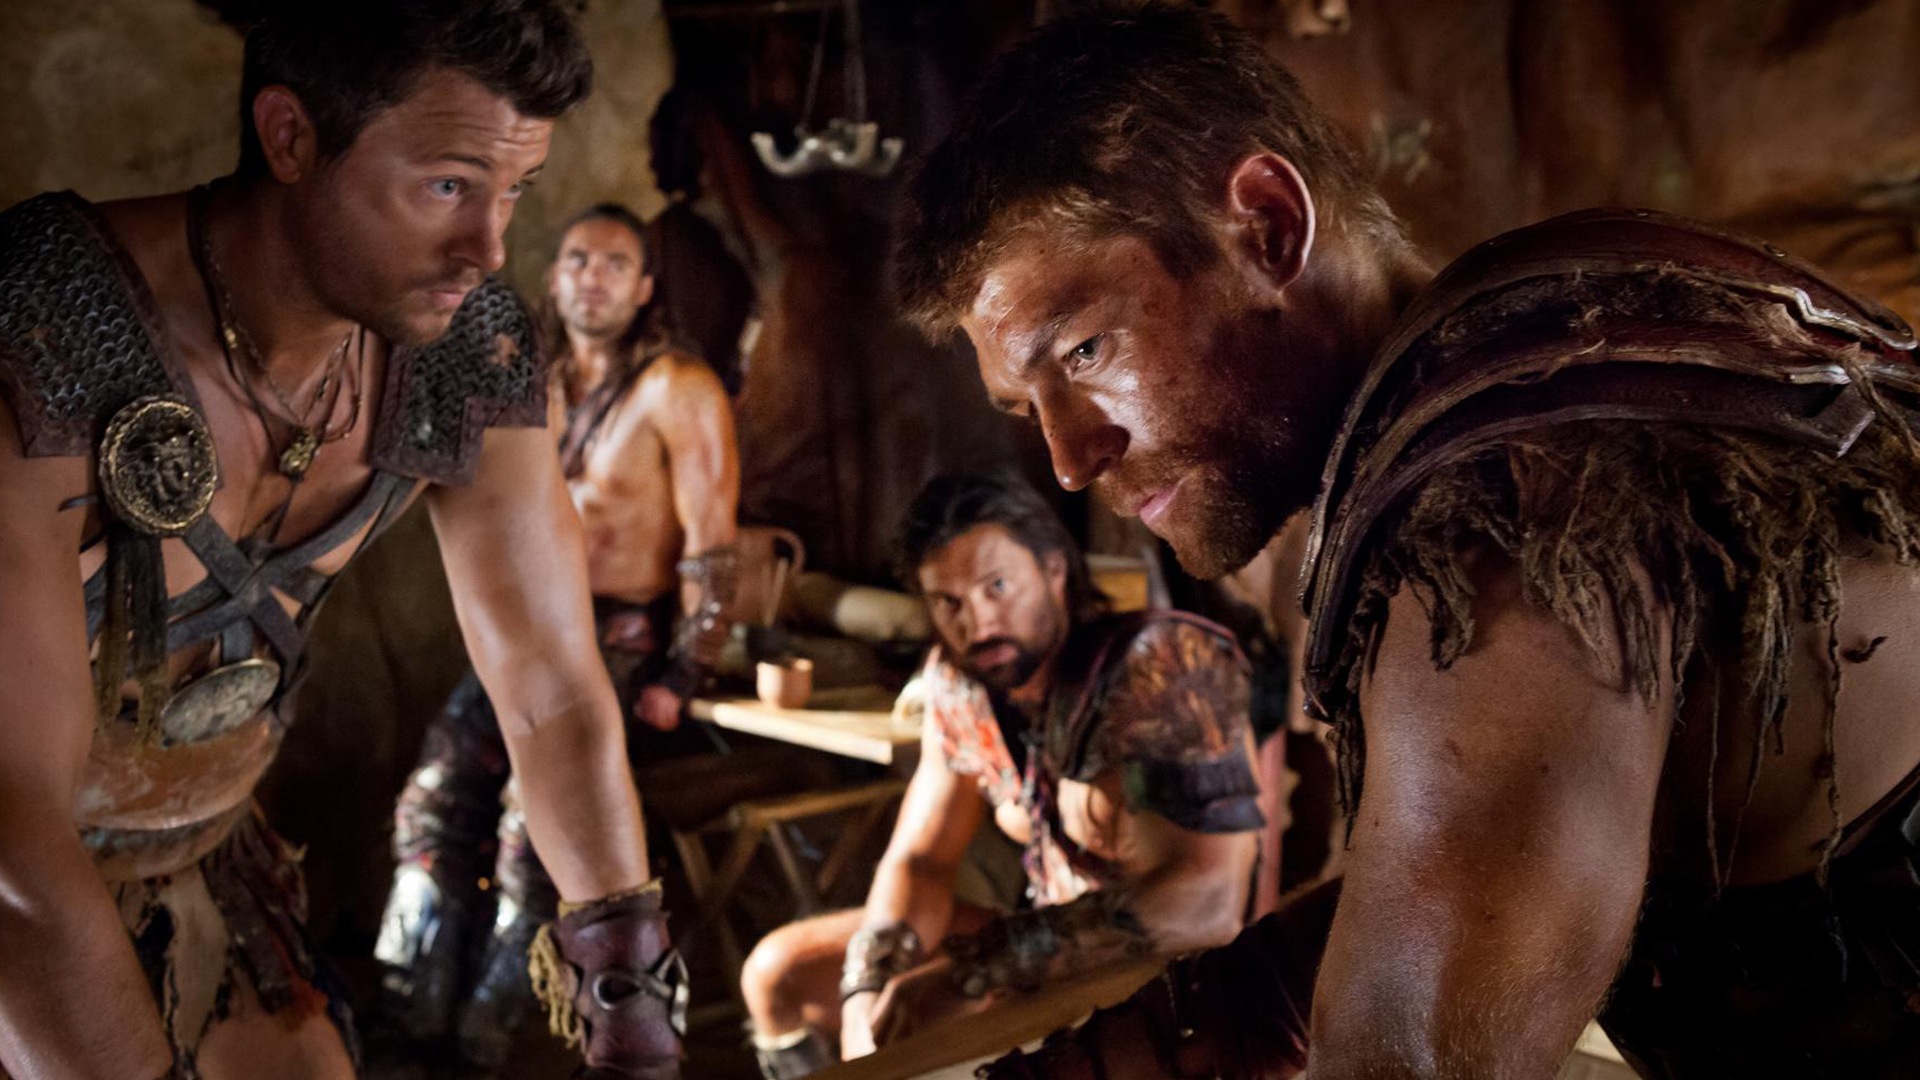 Spartacus: War of the Damned HD Wallpaper #7 - 1920x1080